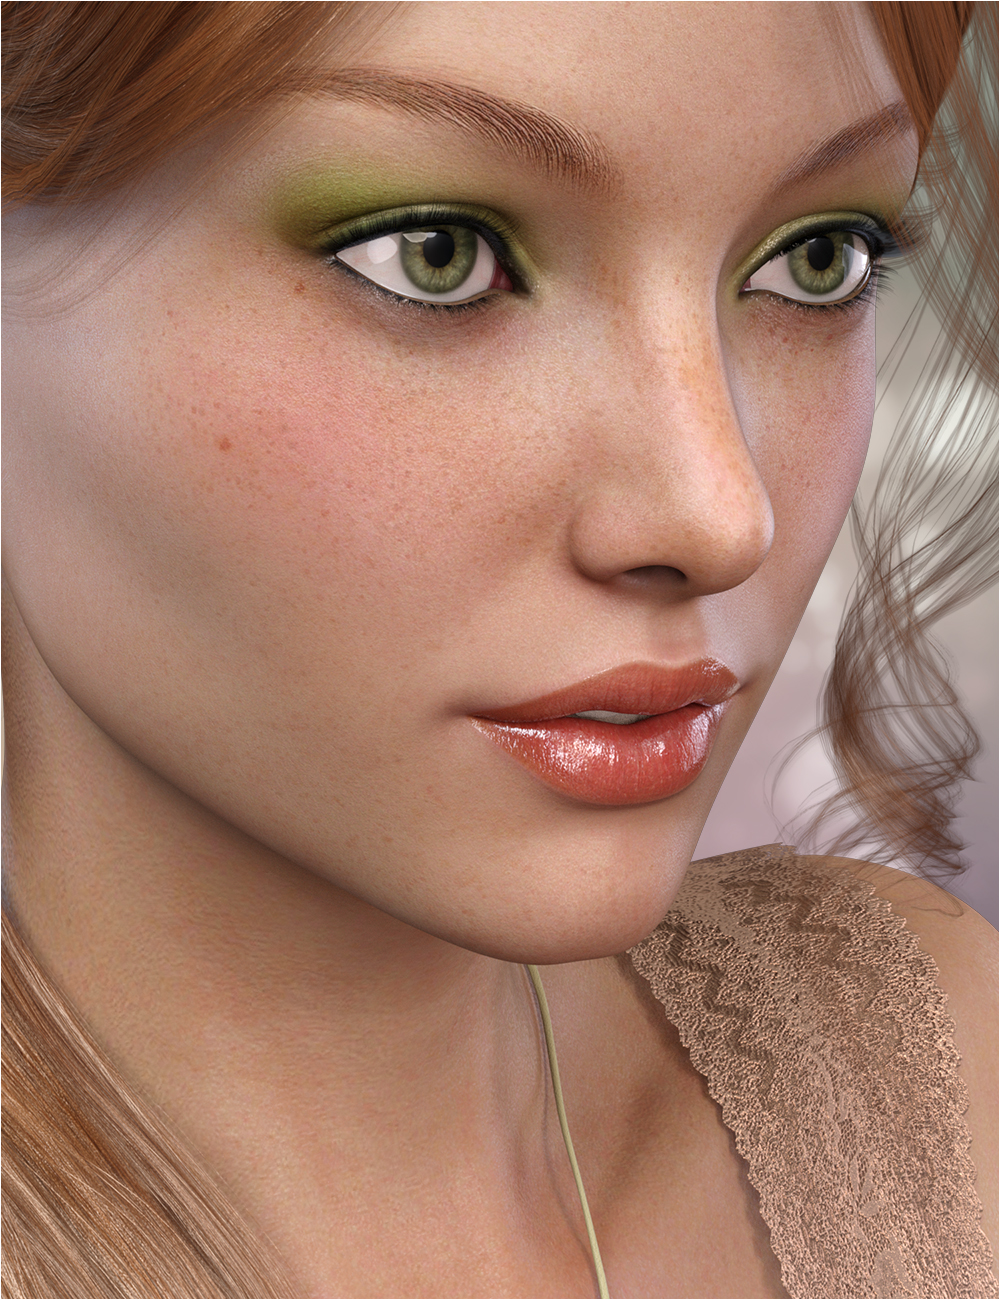 FWSA Finley HD for Victoria 7 and Her Jewelry by: Fred Winkler ArtSabbyFisty & Darc, 3D Models by Daz 3D